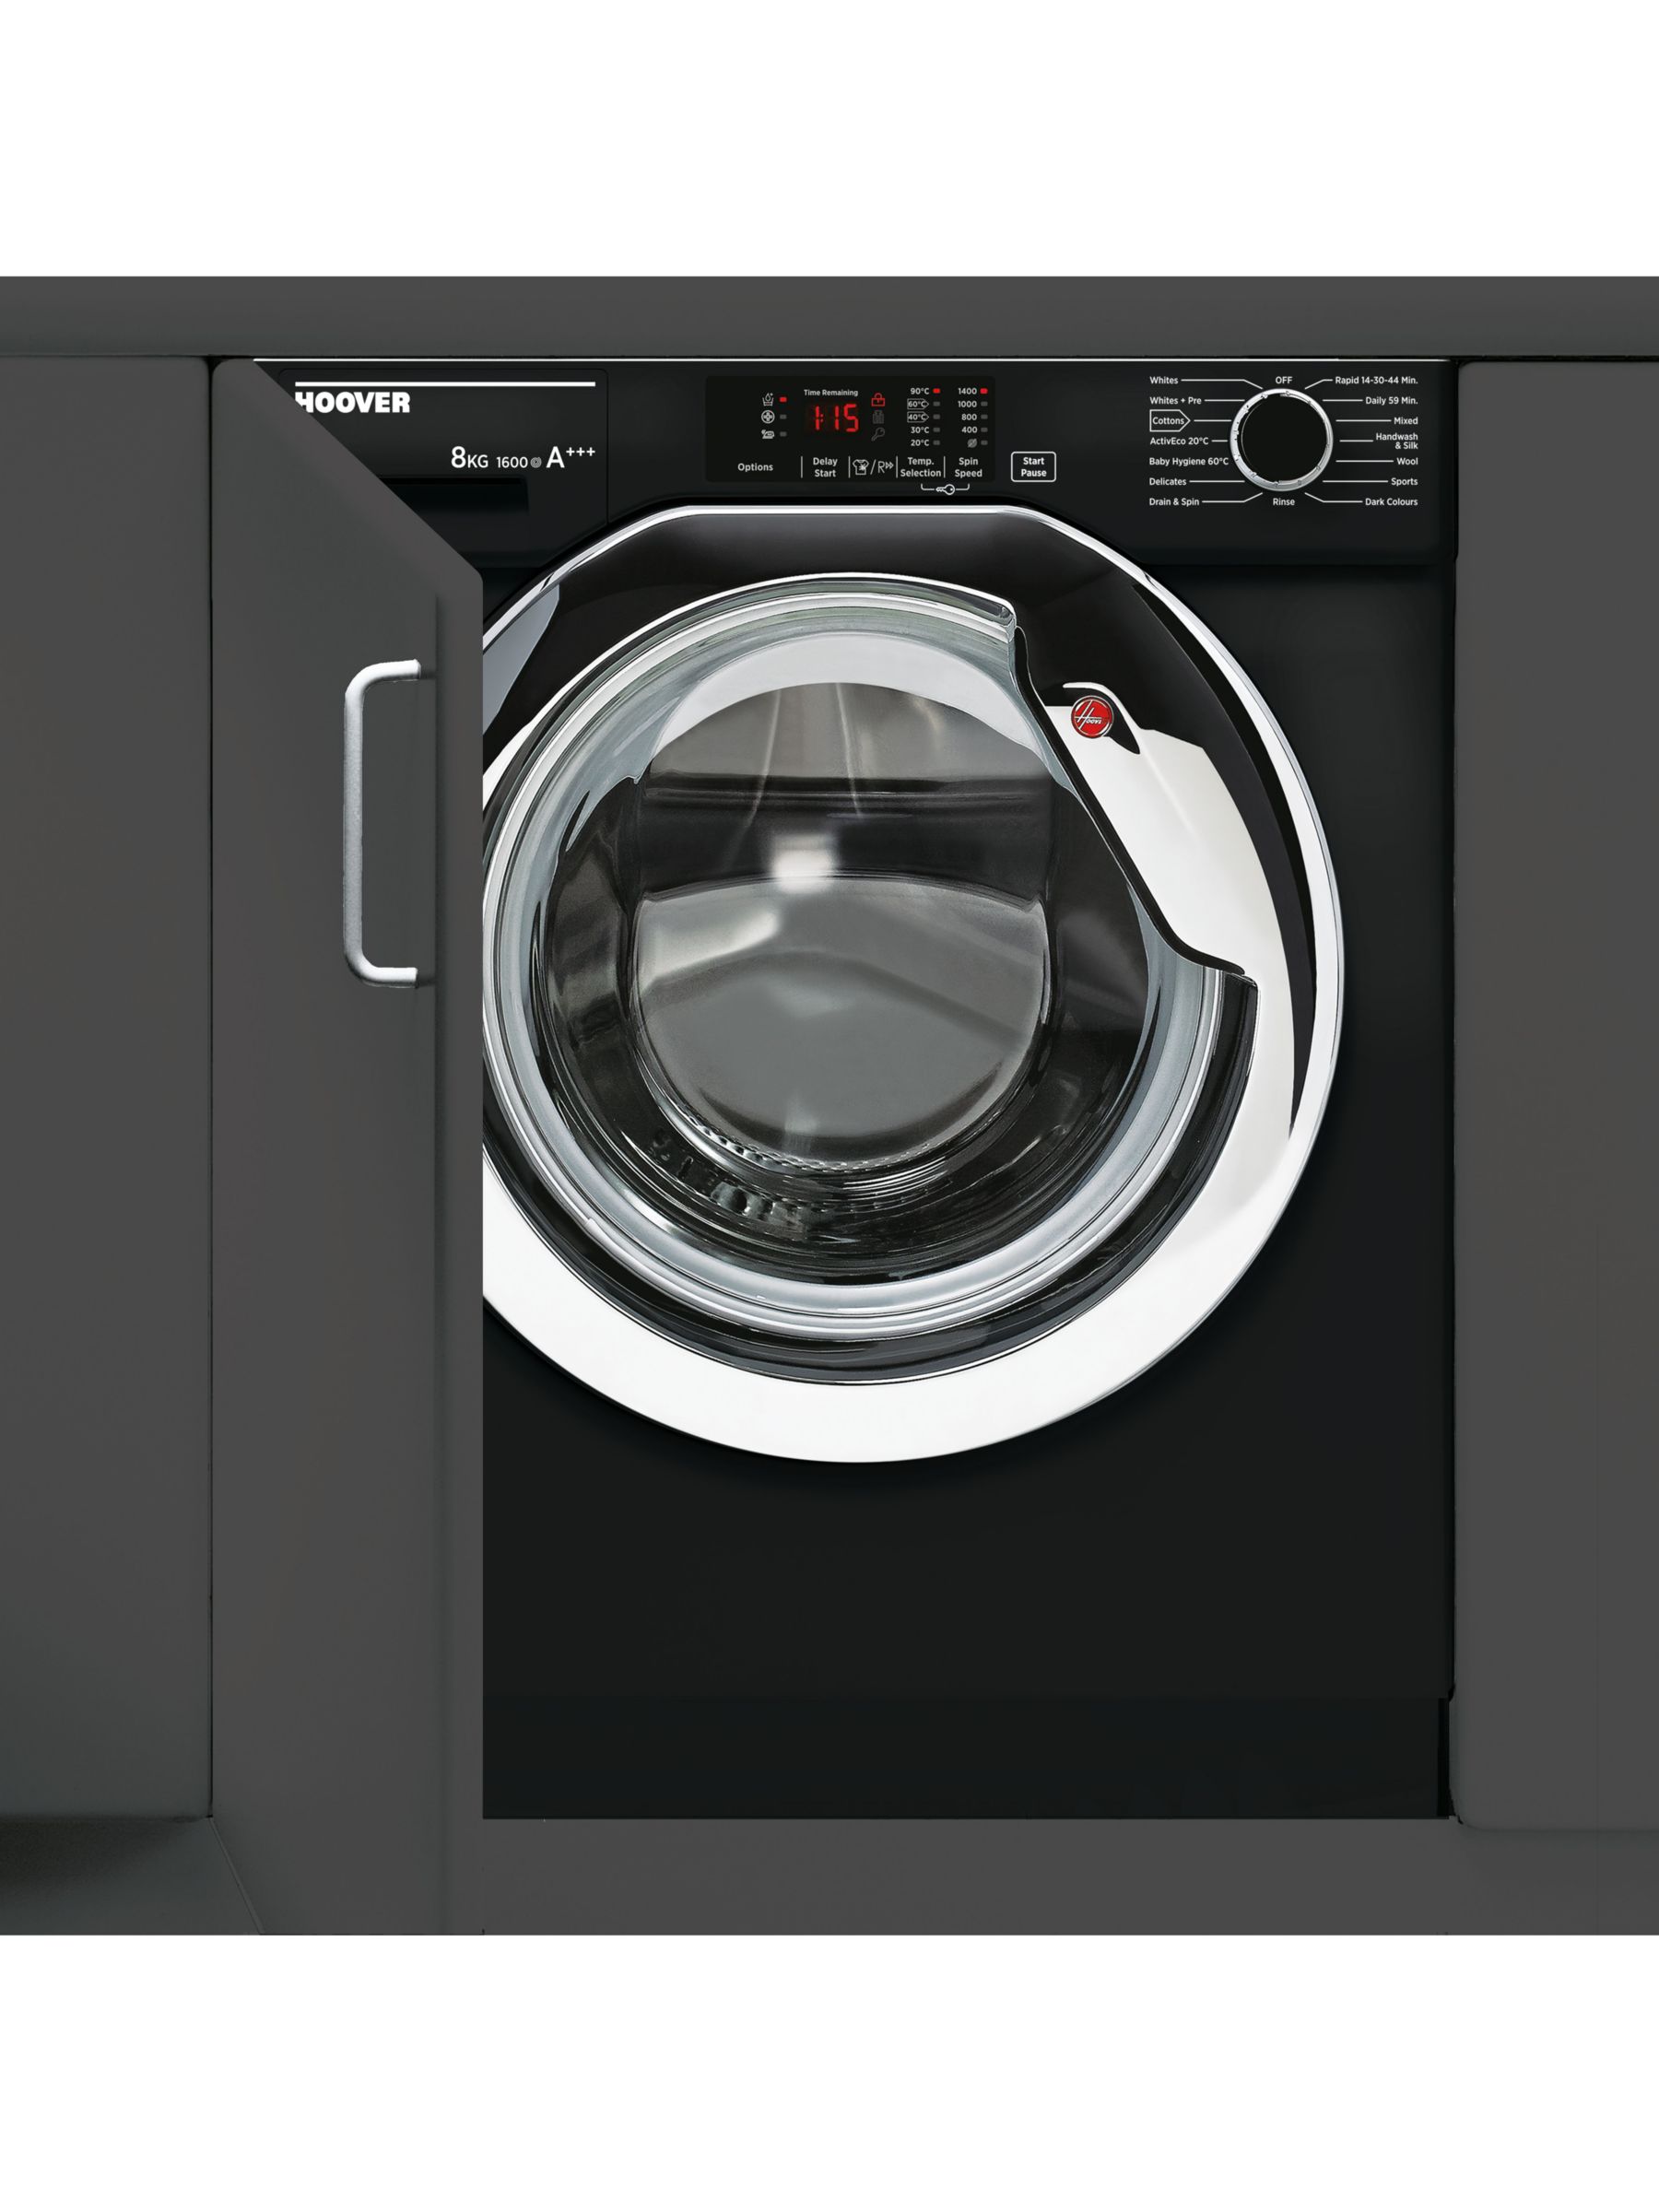 Hoover HBWM 816DCB/1-80 Integrated Washing Machine, 8kg Load, A+++ Energy Rating, 1400rpm, Black